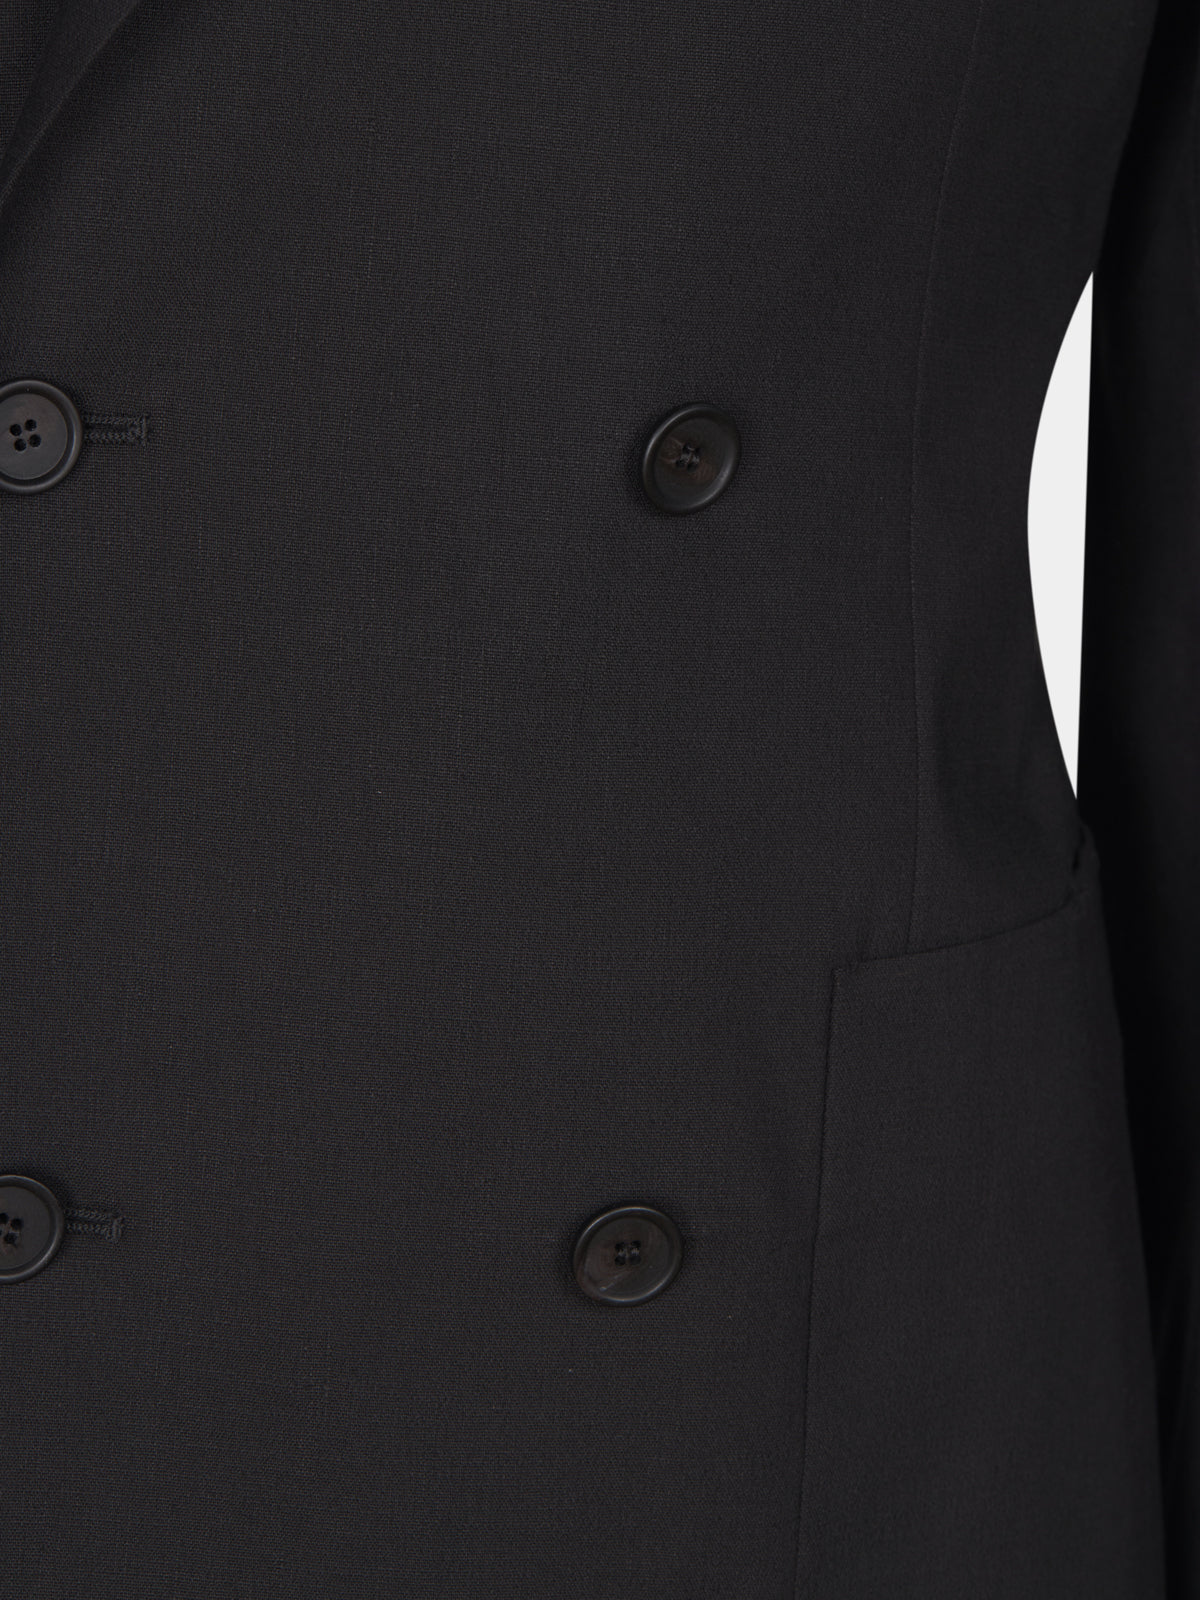 Double-breasted jacket in black stretch linen